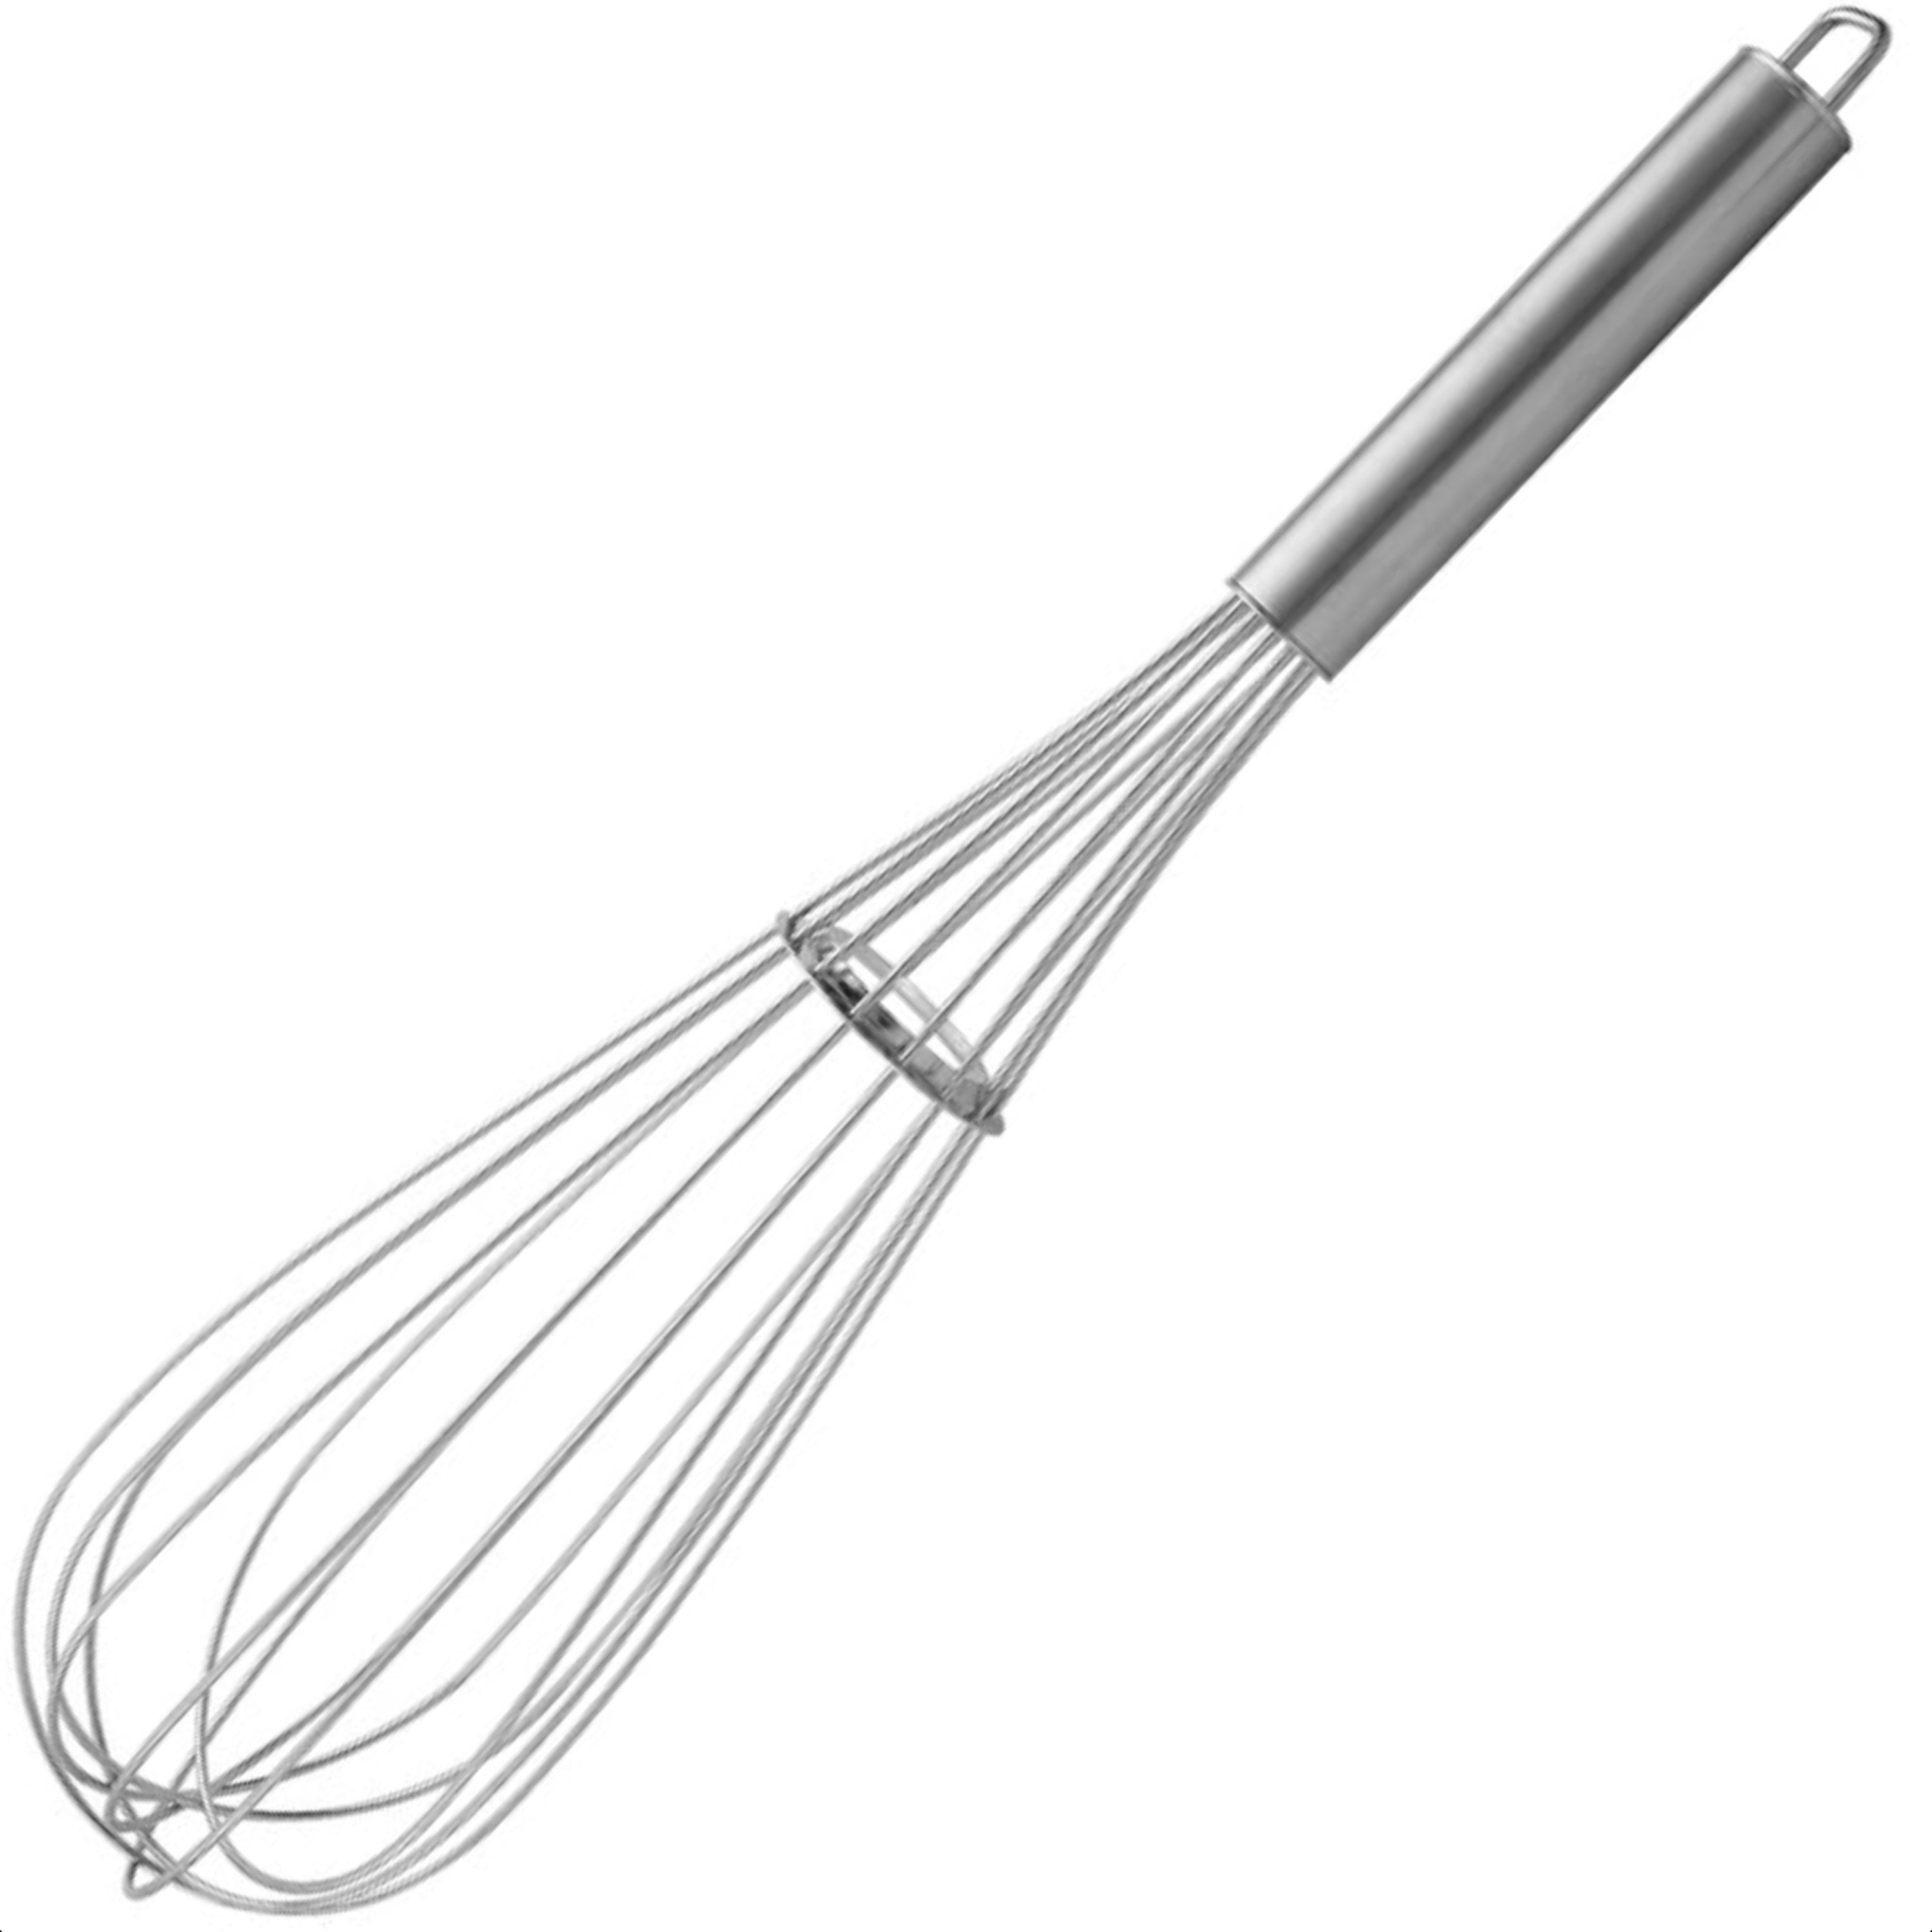 KOWS Pipe handle 2.0mm whisk 40 cm (WK0018)